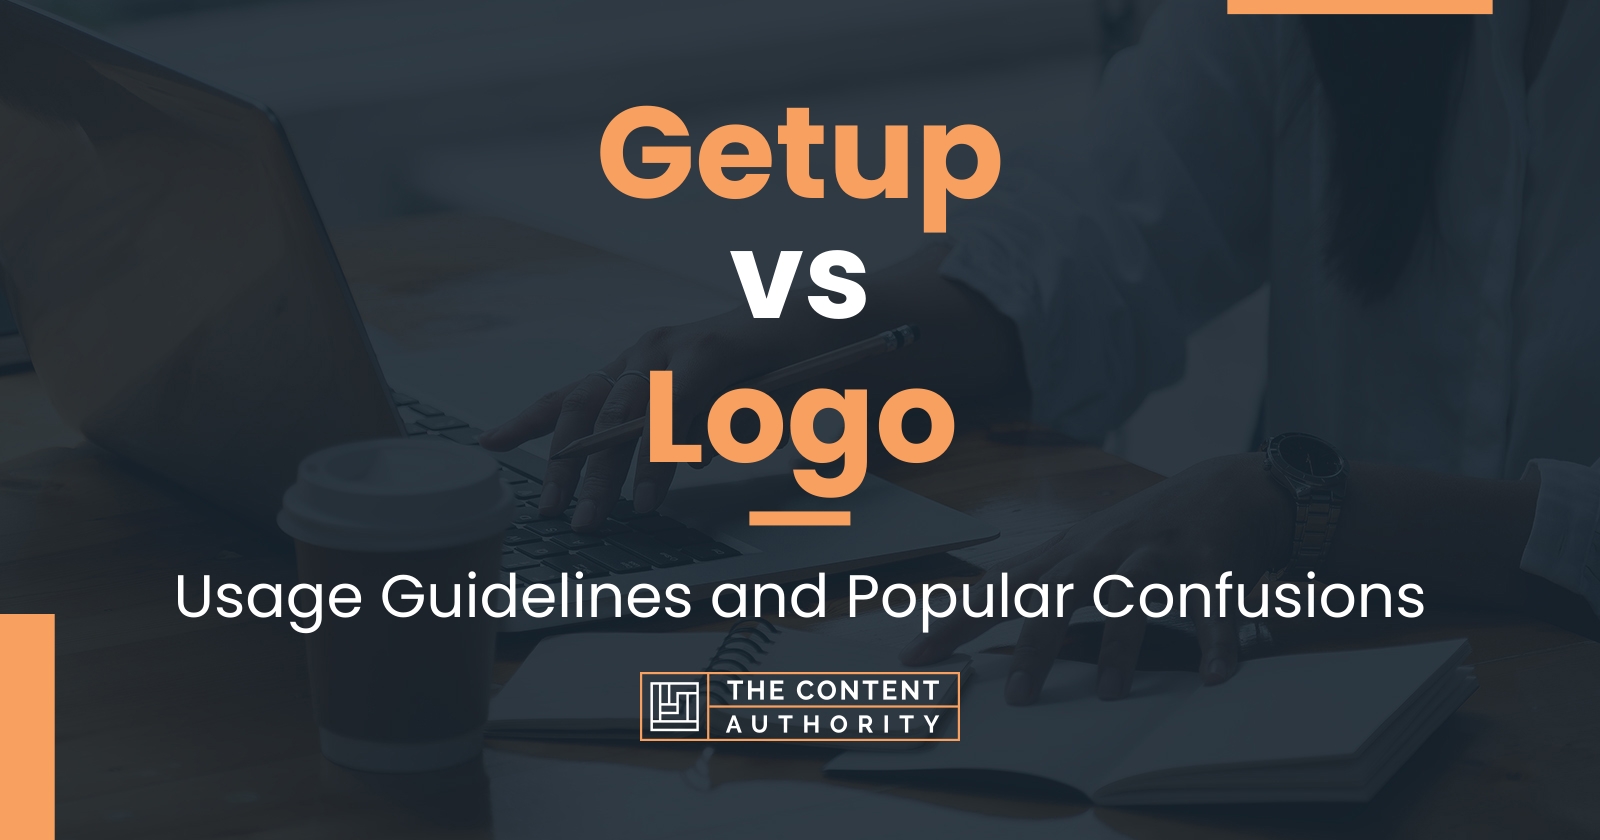 Getup vs Logo: Usage Guidelines and Popular Confusions